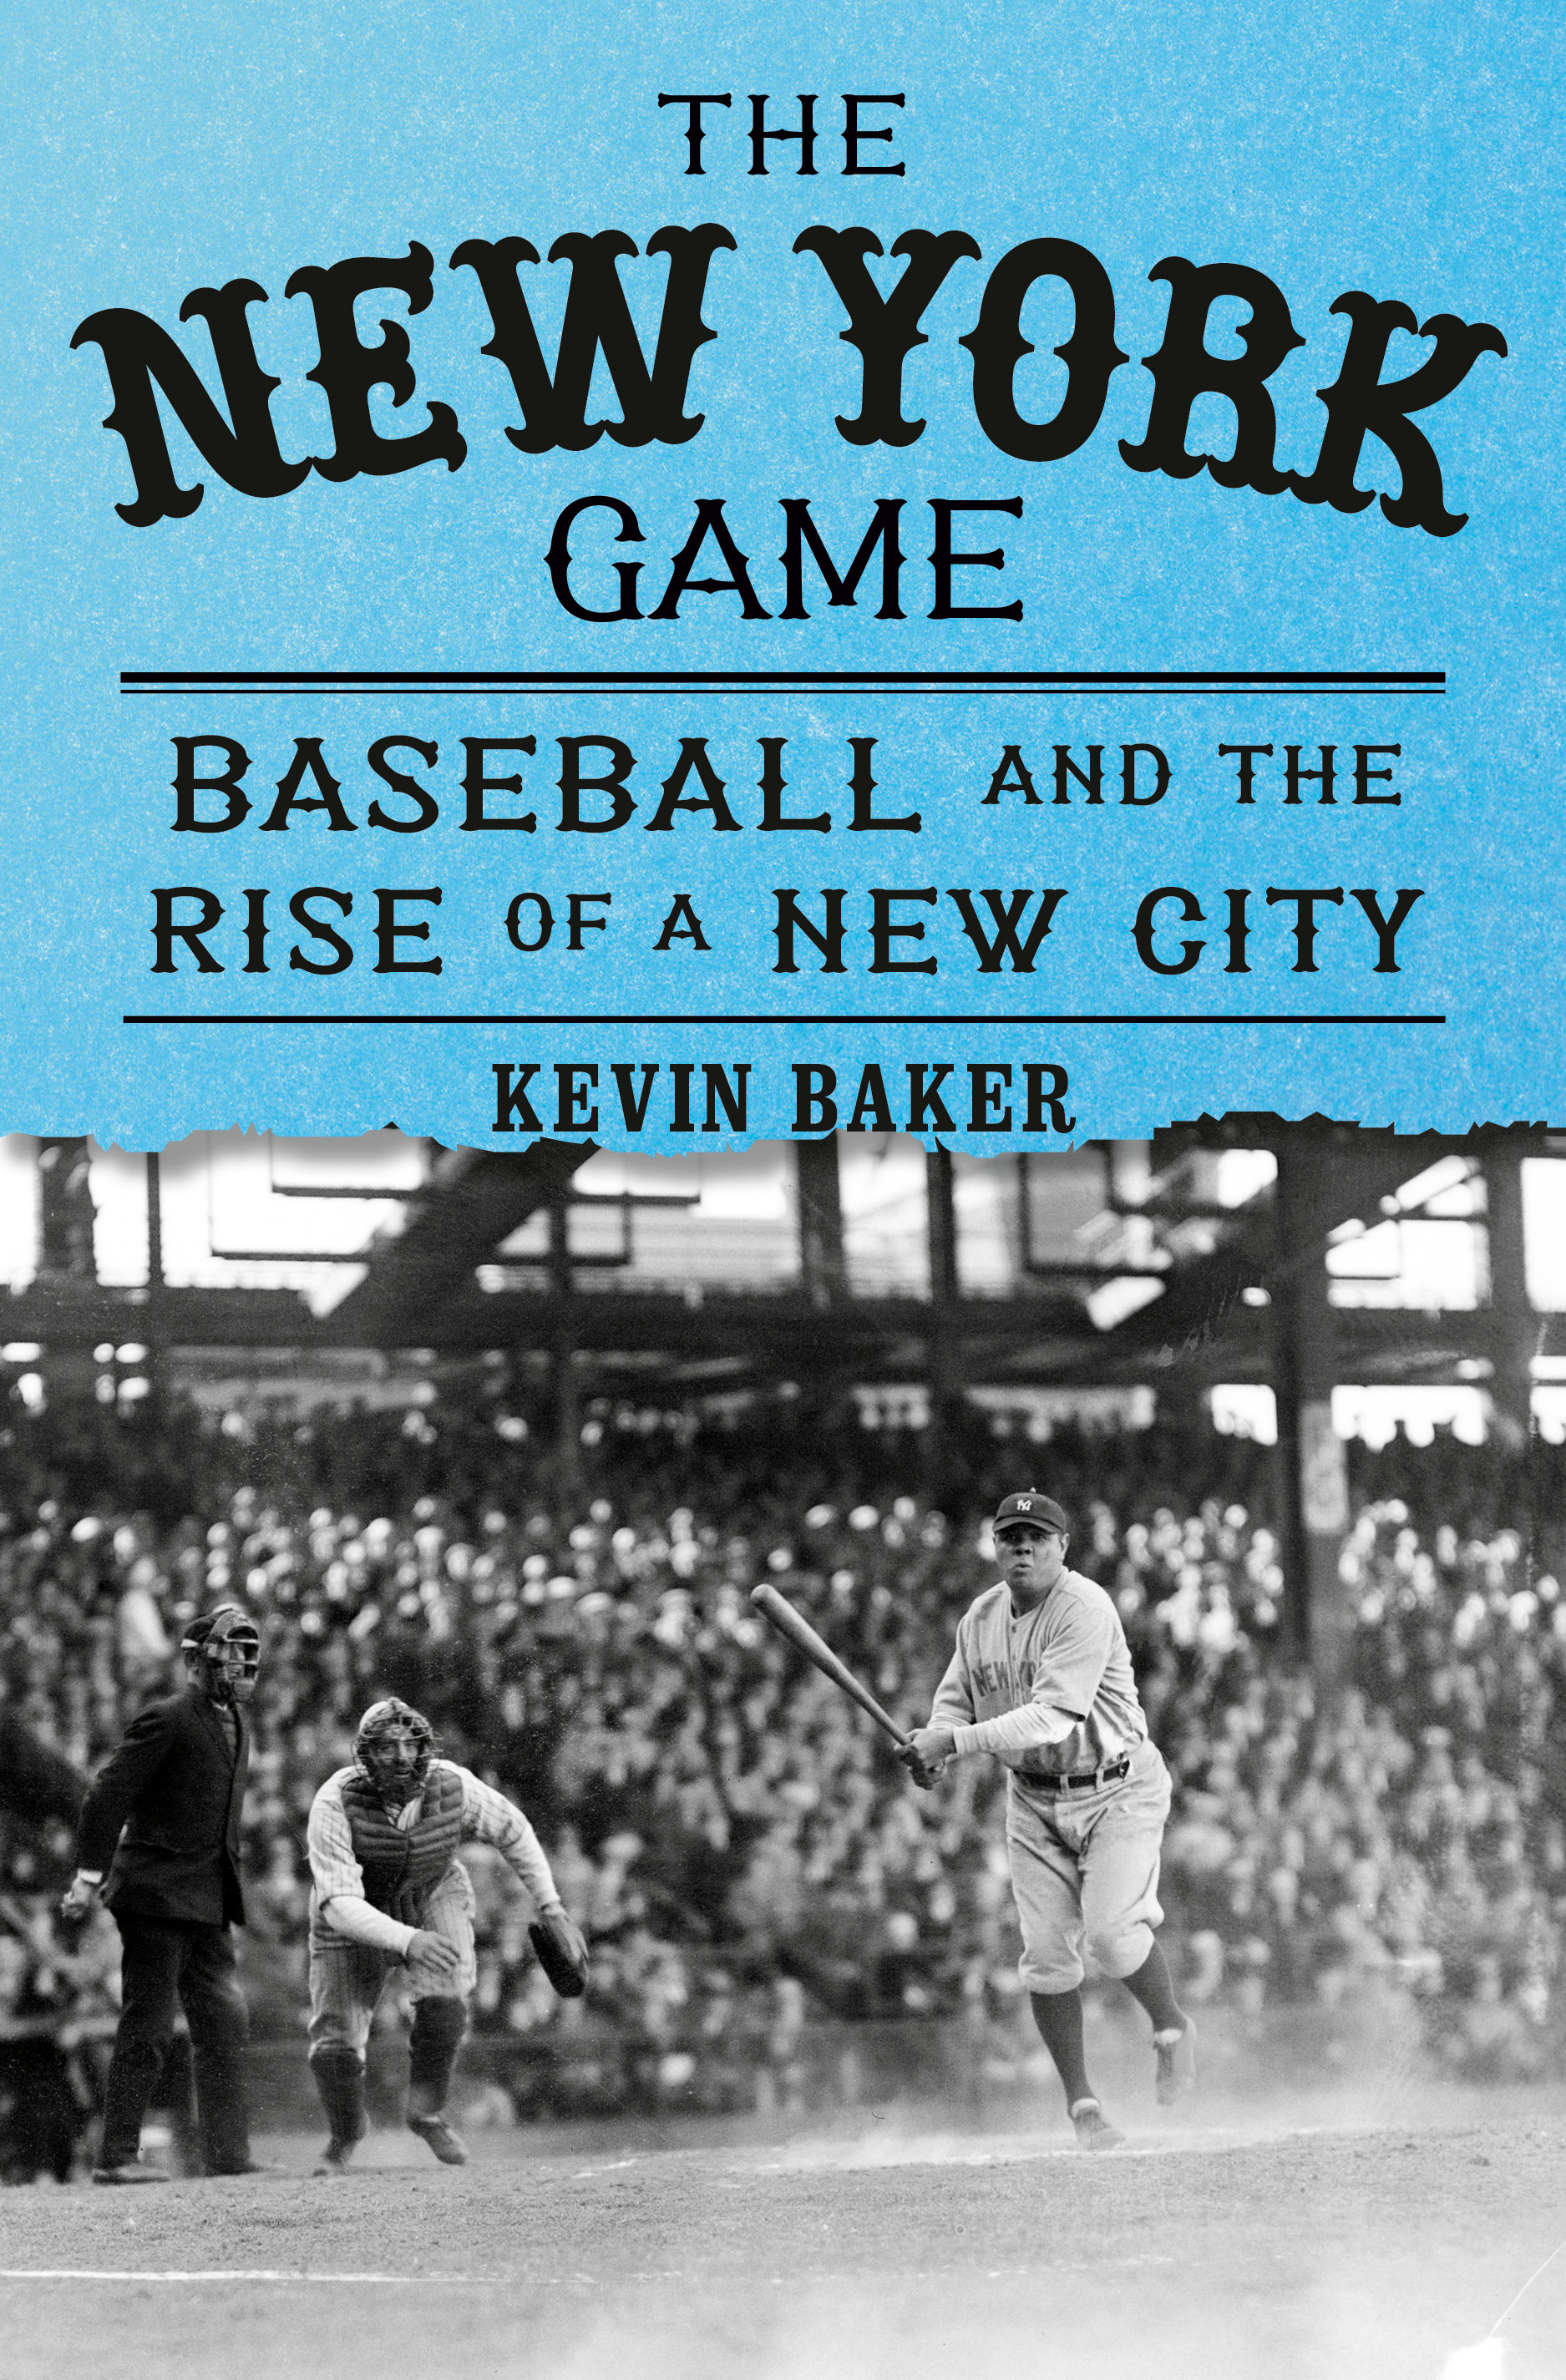 The cover of “The New York Game: Baseball and the Rise of a New City” by Kevin Baker.